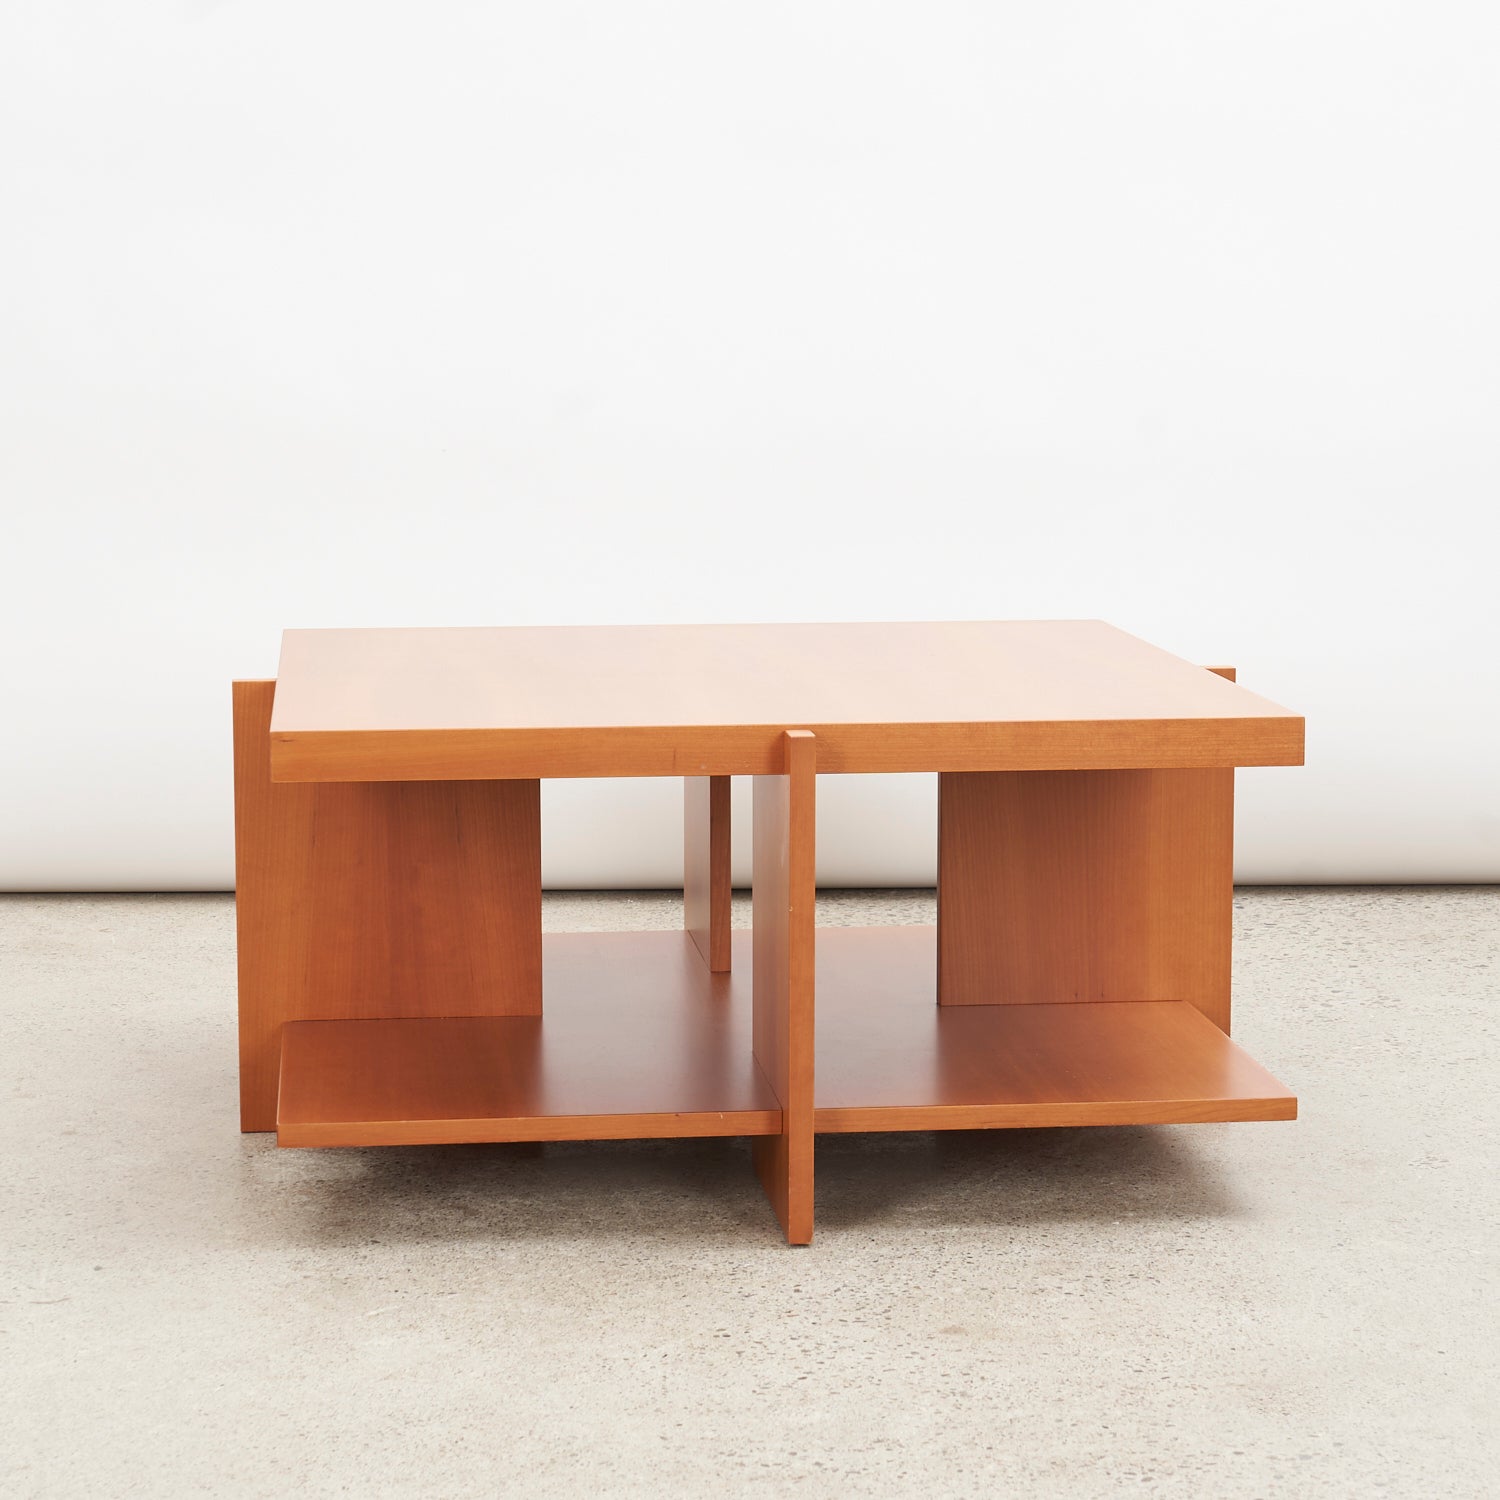 'Lewis' Coffee Table in Cherry Wood by Frank Lloyd Wright for Cassina